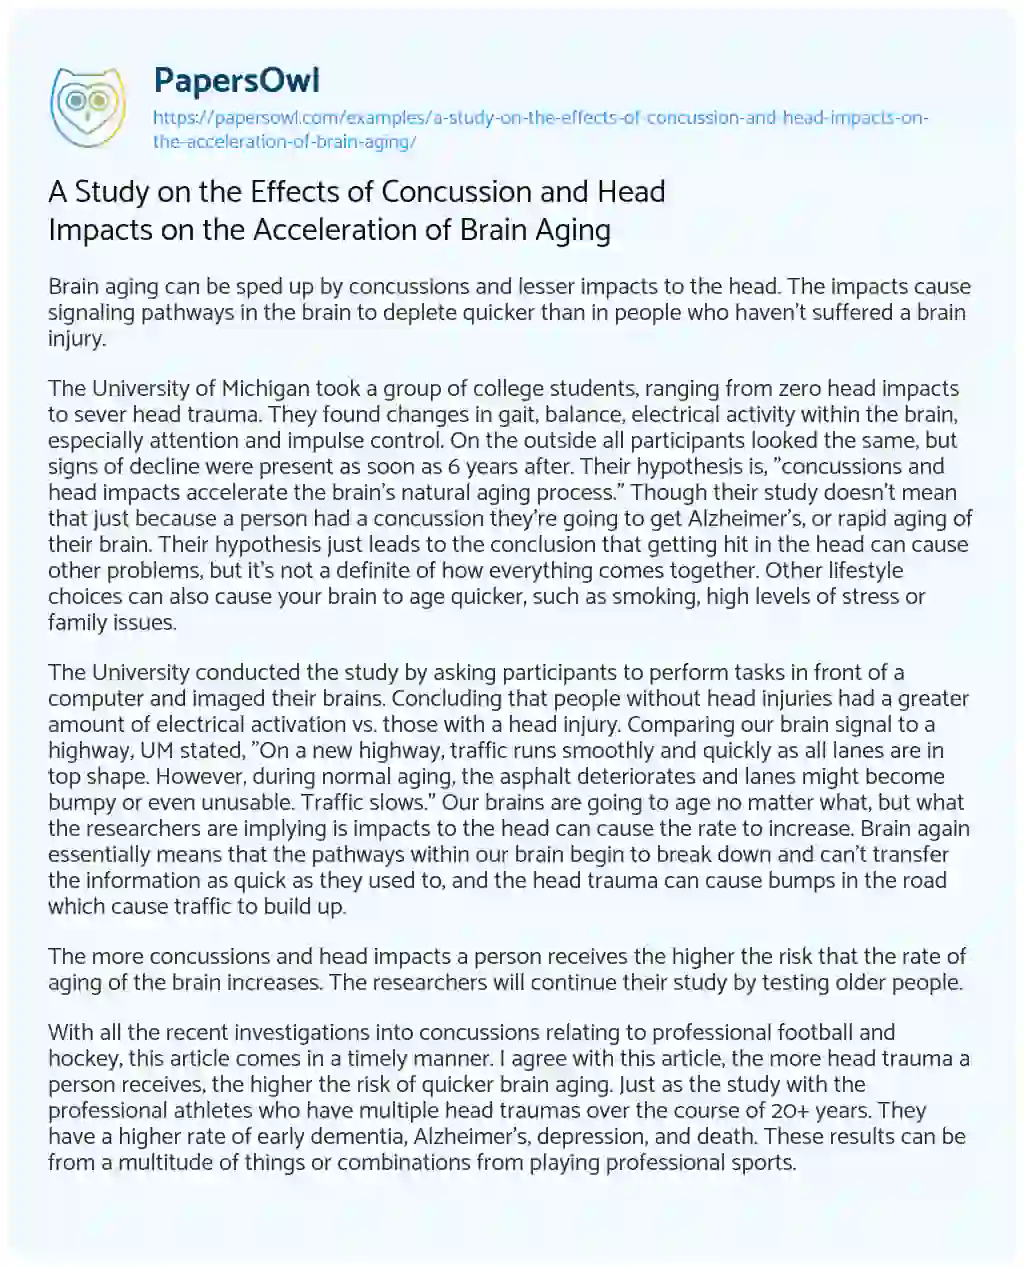 A Study on the Effects of Concussion and Head Impacts on the Acceleration of Brain Aging essay